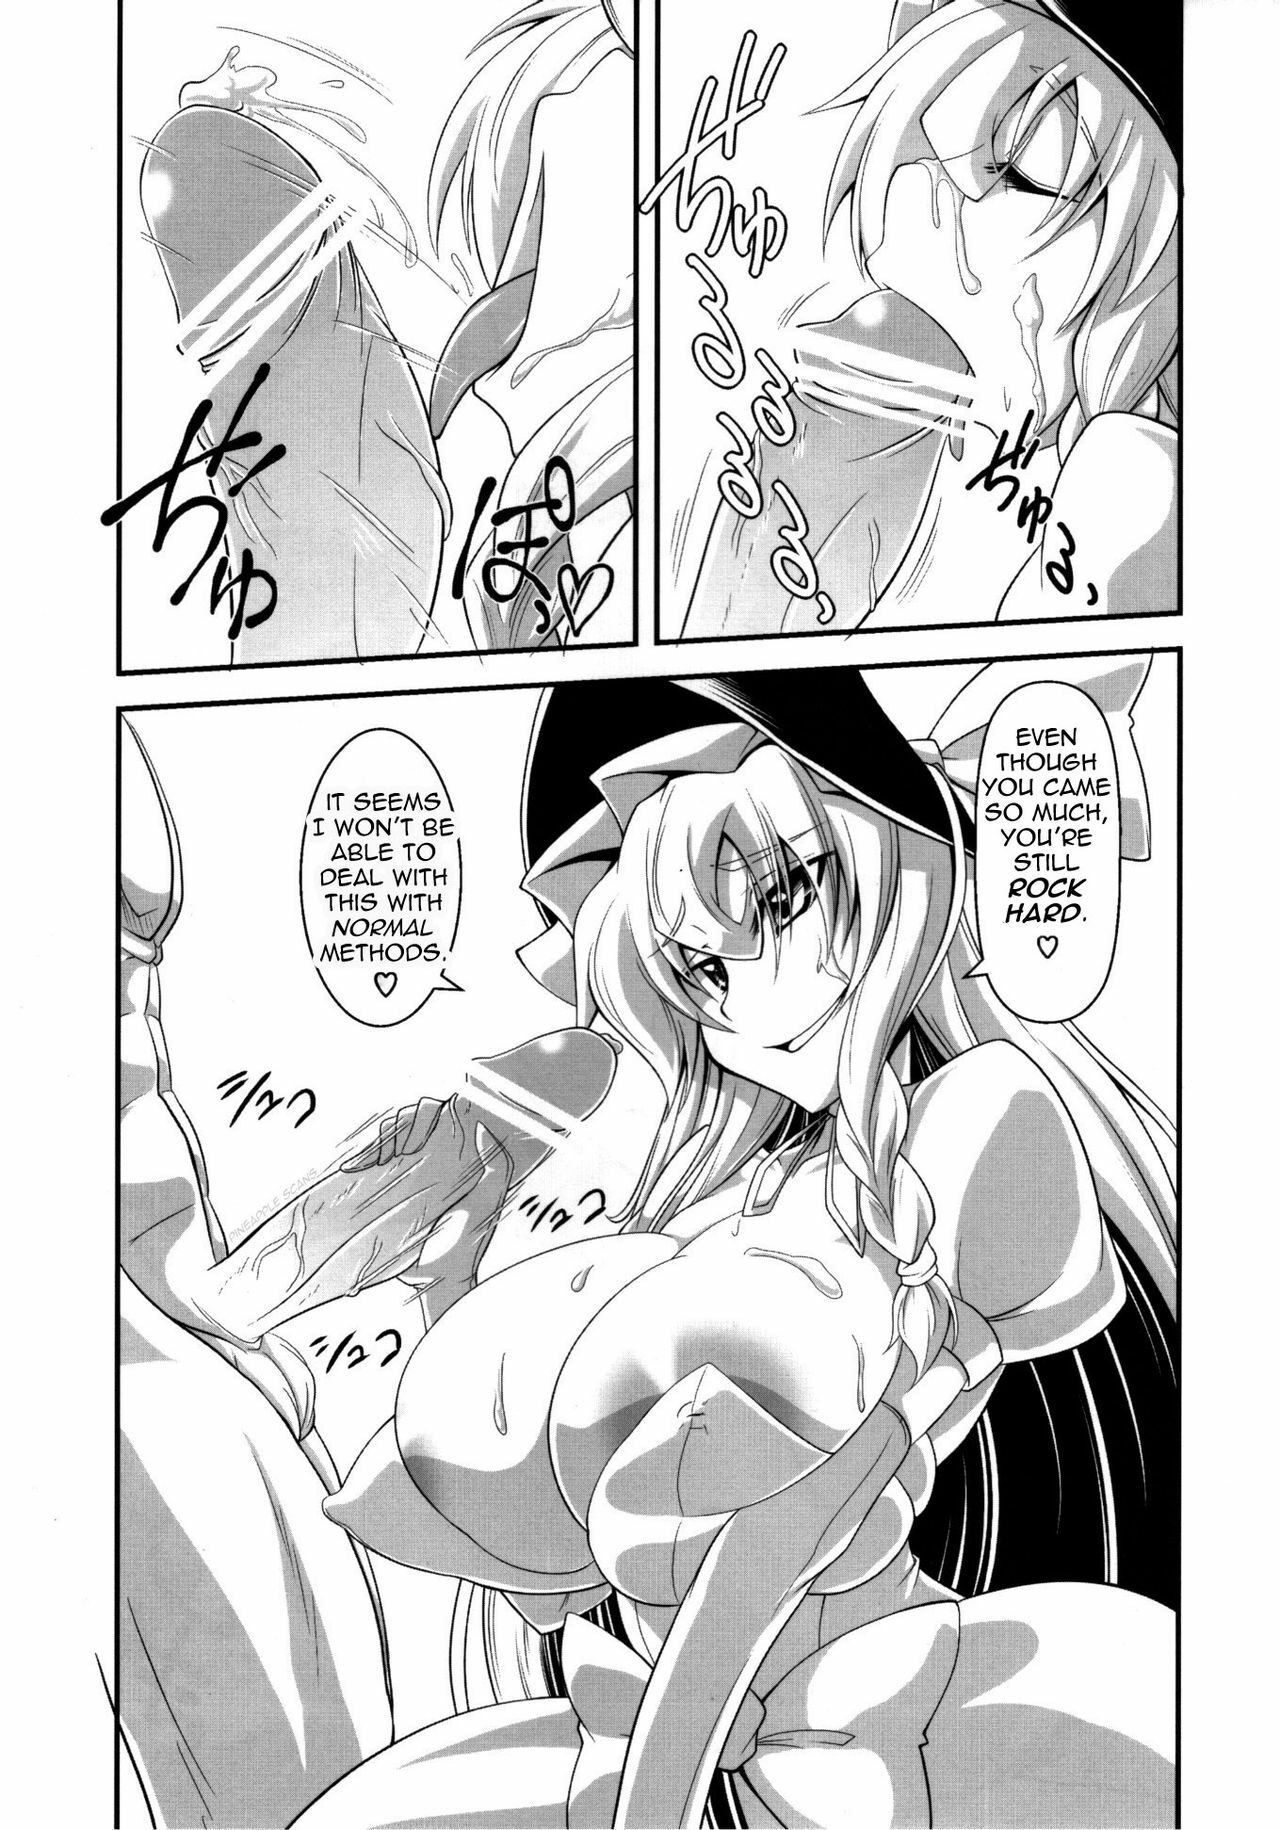 (Kouroumu 6) [Forever and ever... (Eisen)] GLAMOROUS MARISA (Touhou Project) [English] =Pineapples r Us= page 7 full